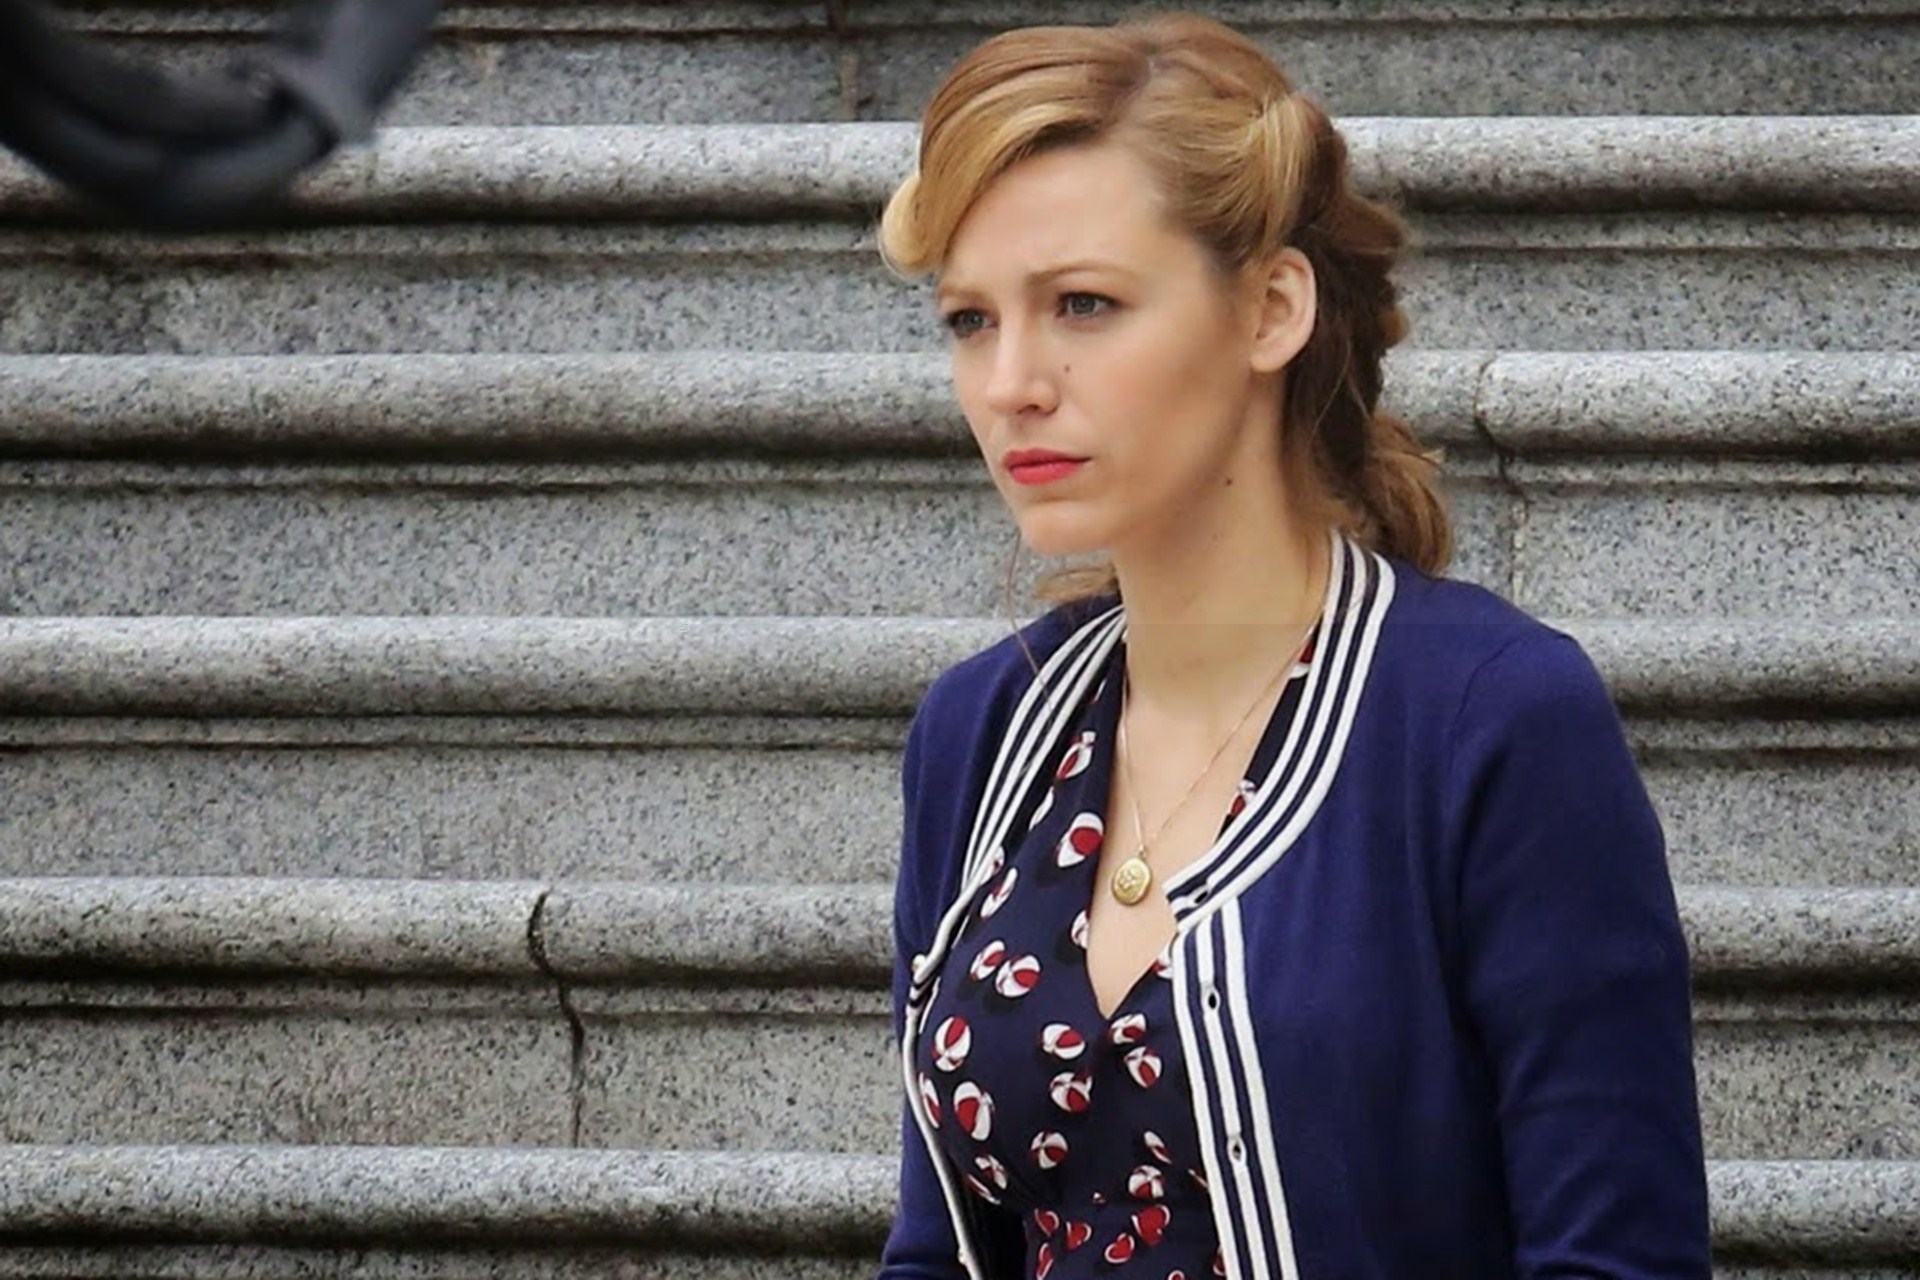 Blake Lively, The Age of Adaline